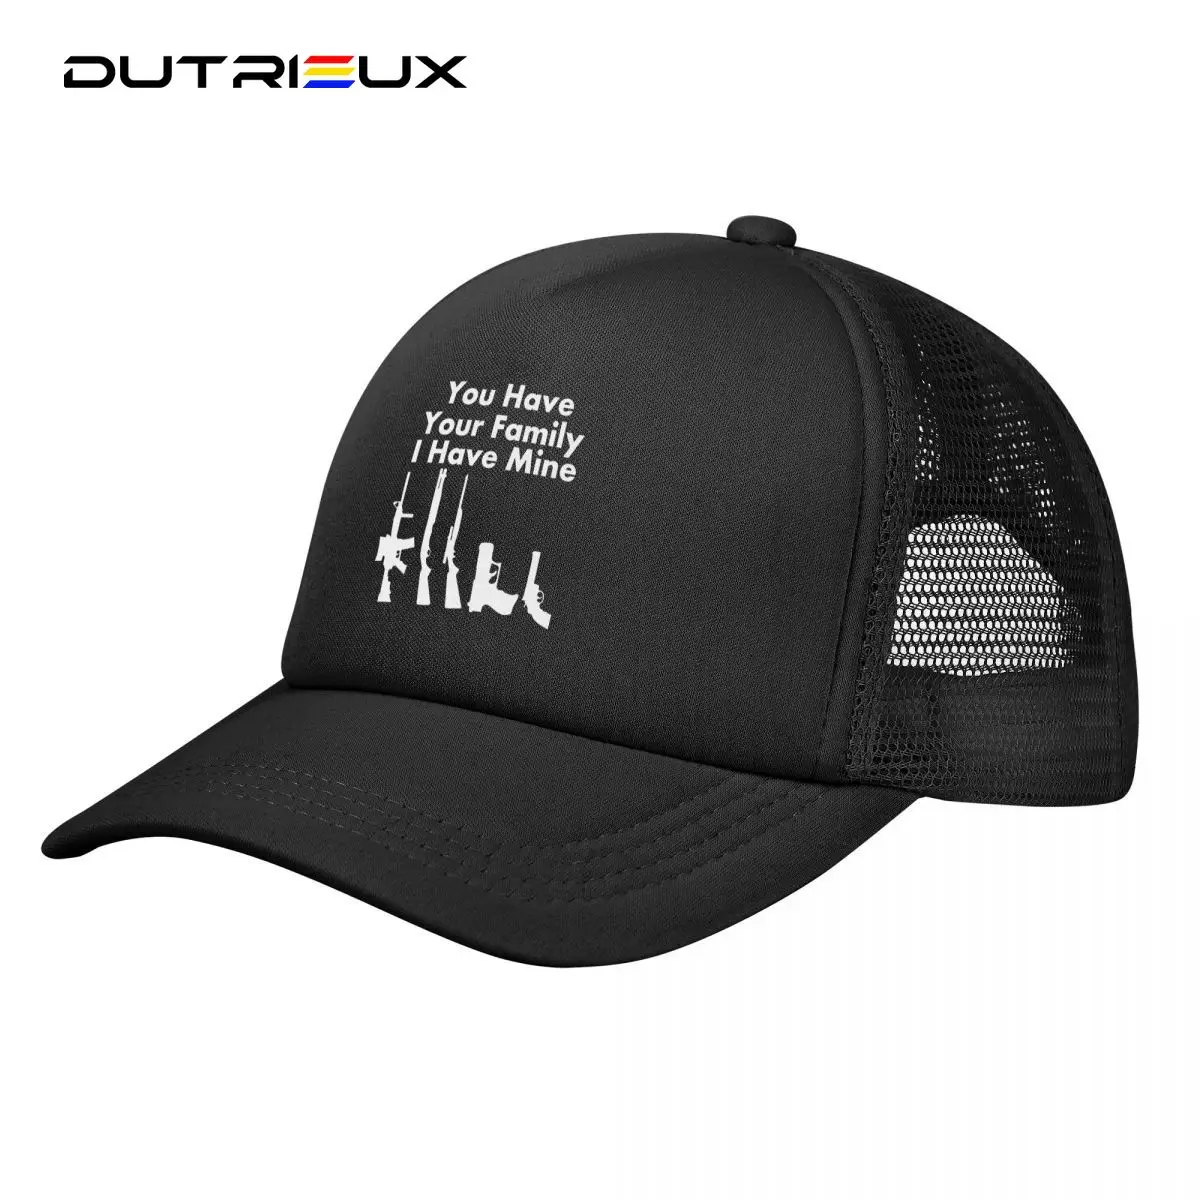 

You Have Your Family Guns Original Adjustable Mesh Trucker Hat for Men and Women